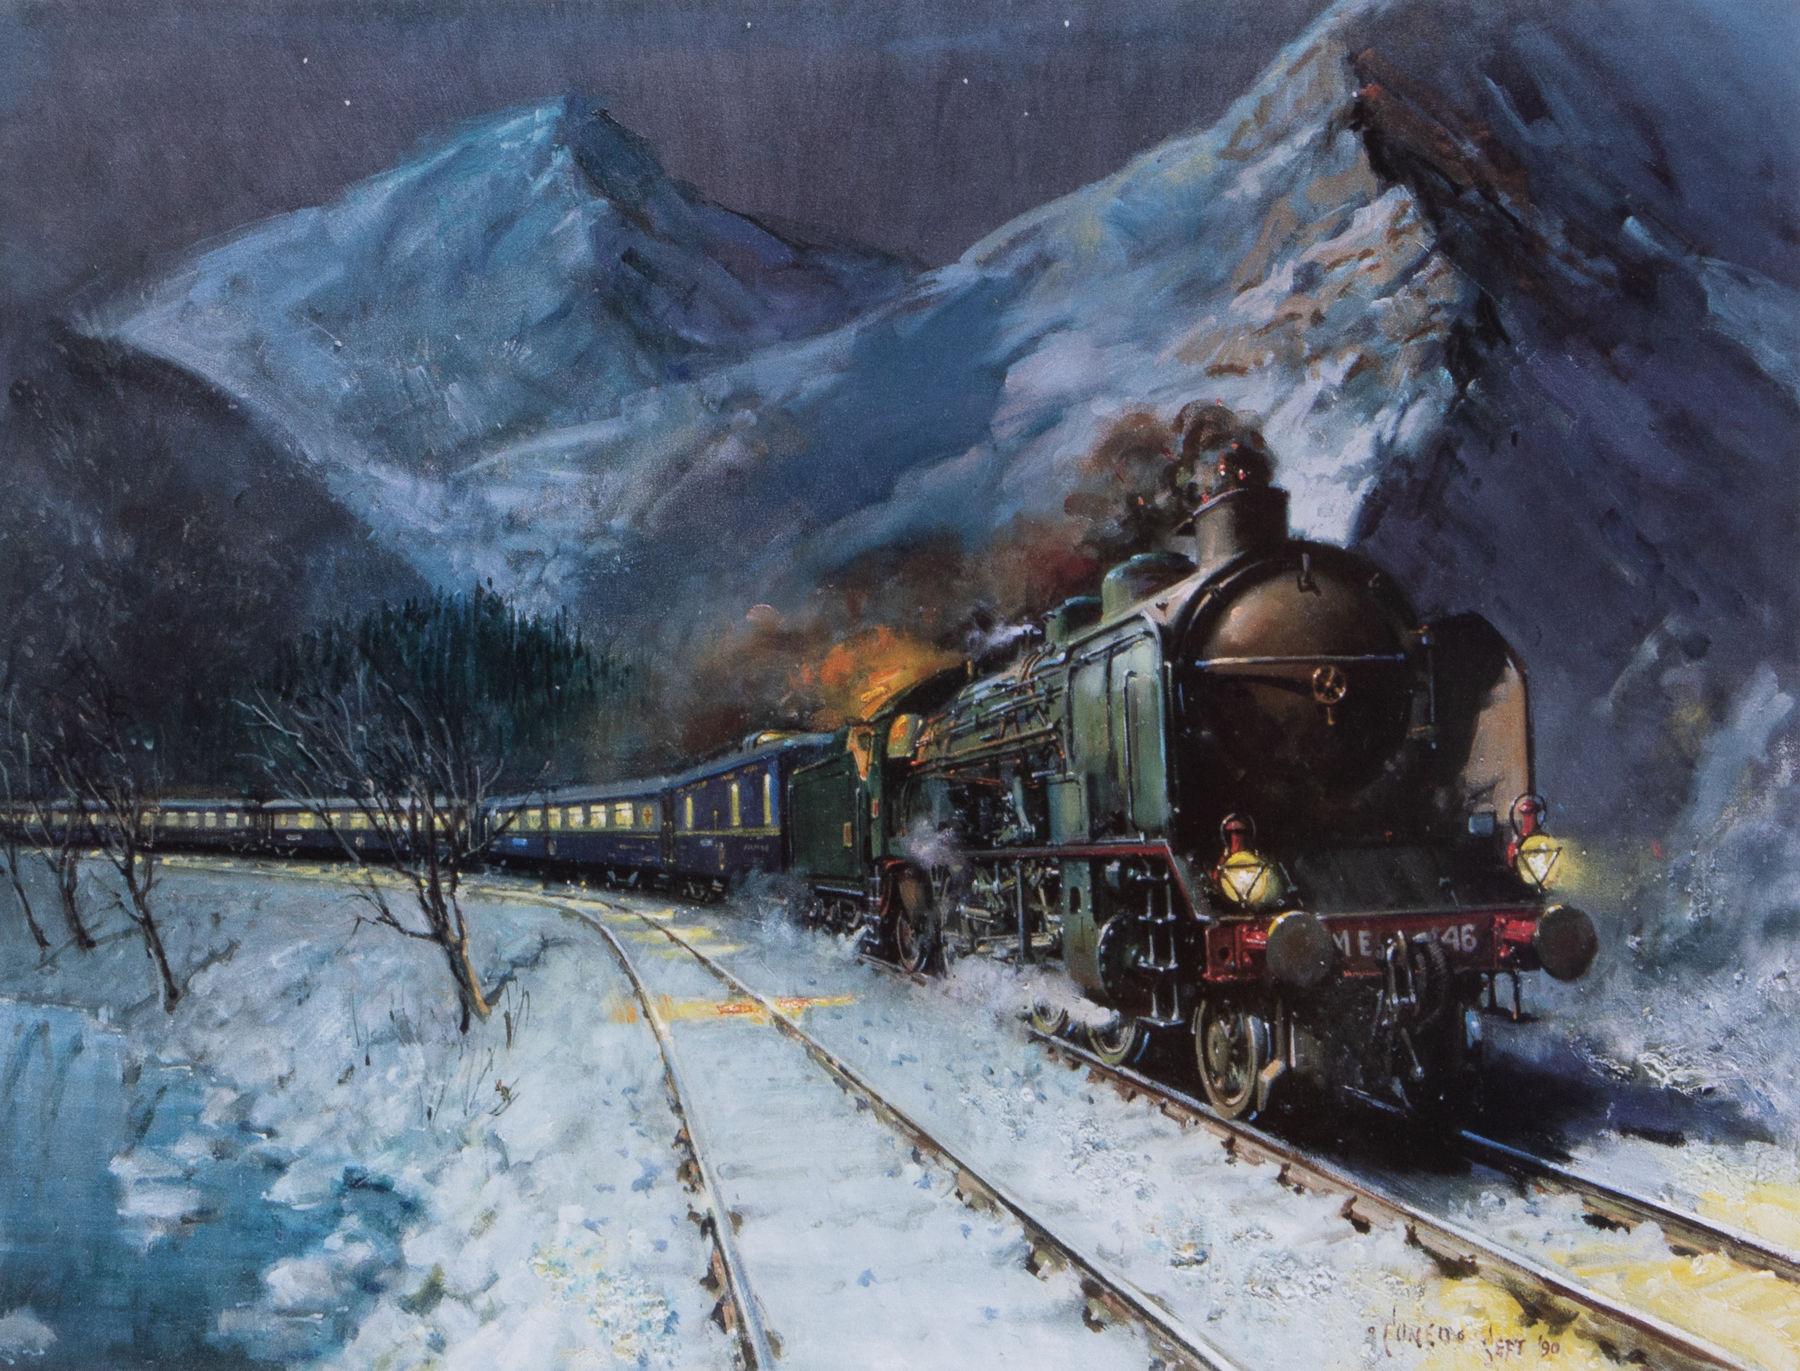 Terence Cuneo, signed limited edition print 'Orient Express' 228/650, 43cm x 56cm, with certificate, - Image 2 of 2